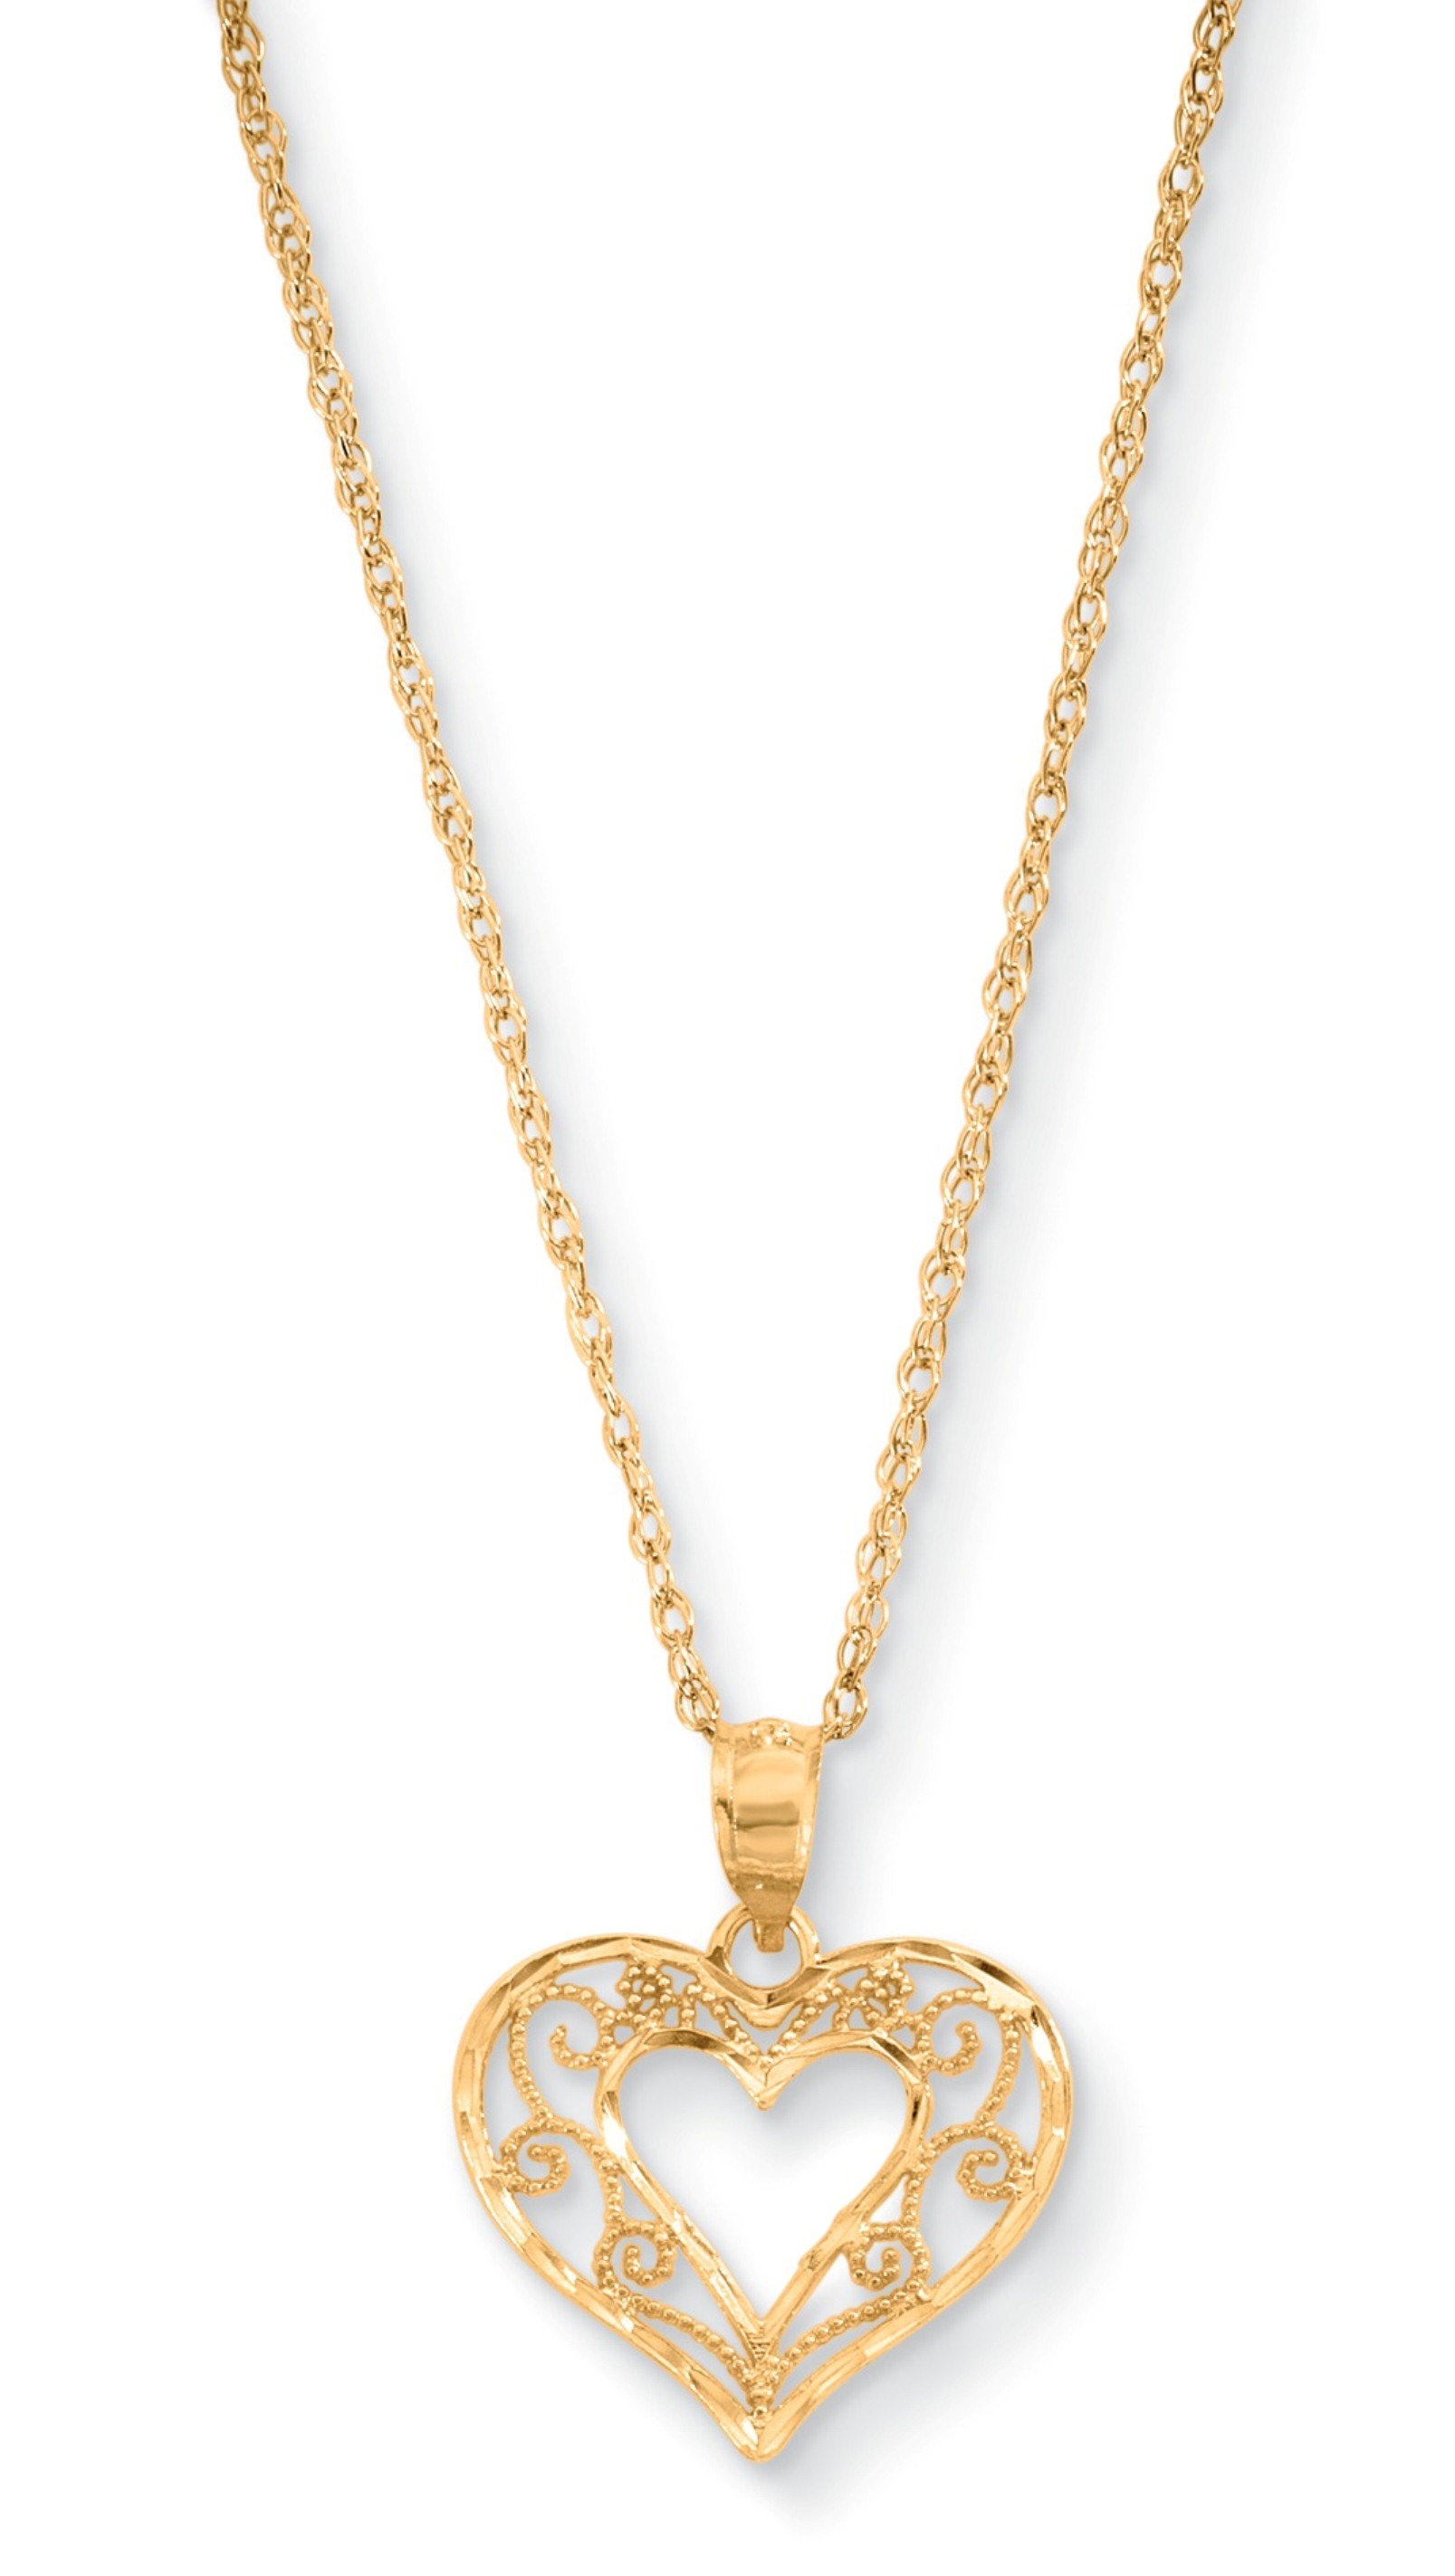 10K Gold Open Lace Heart Pendant and 14K Gold Filled Chain ...